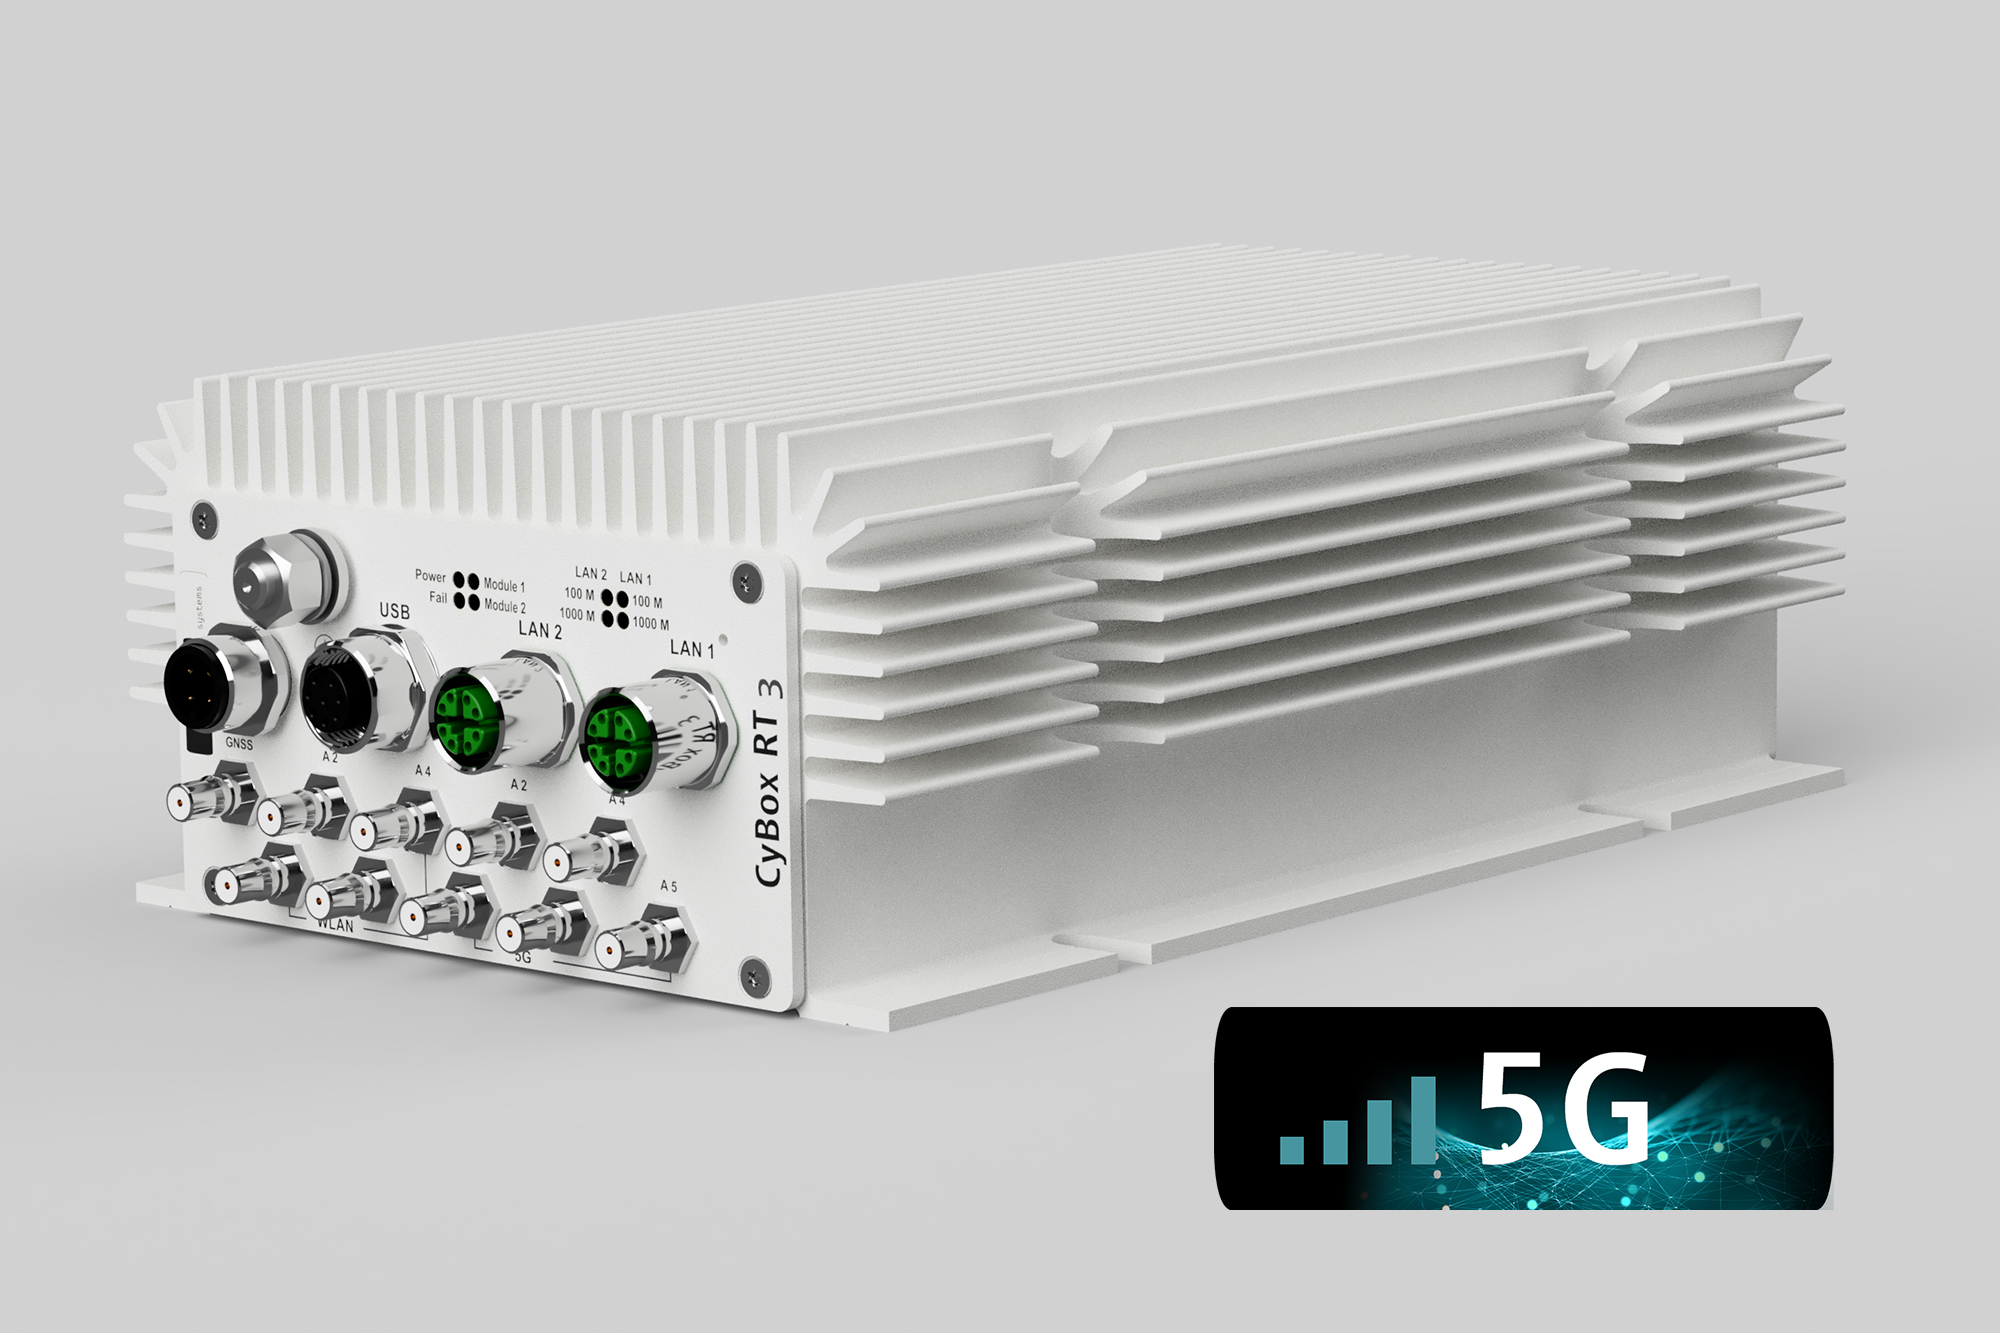 ELTEC Elektronik has developed the CyBox RT 3-W, a new robust, maintenance-free and EN 50155-certified router for railway applications